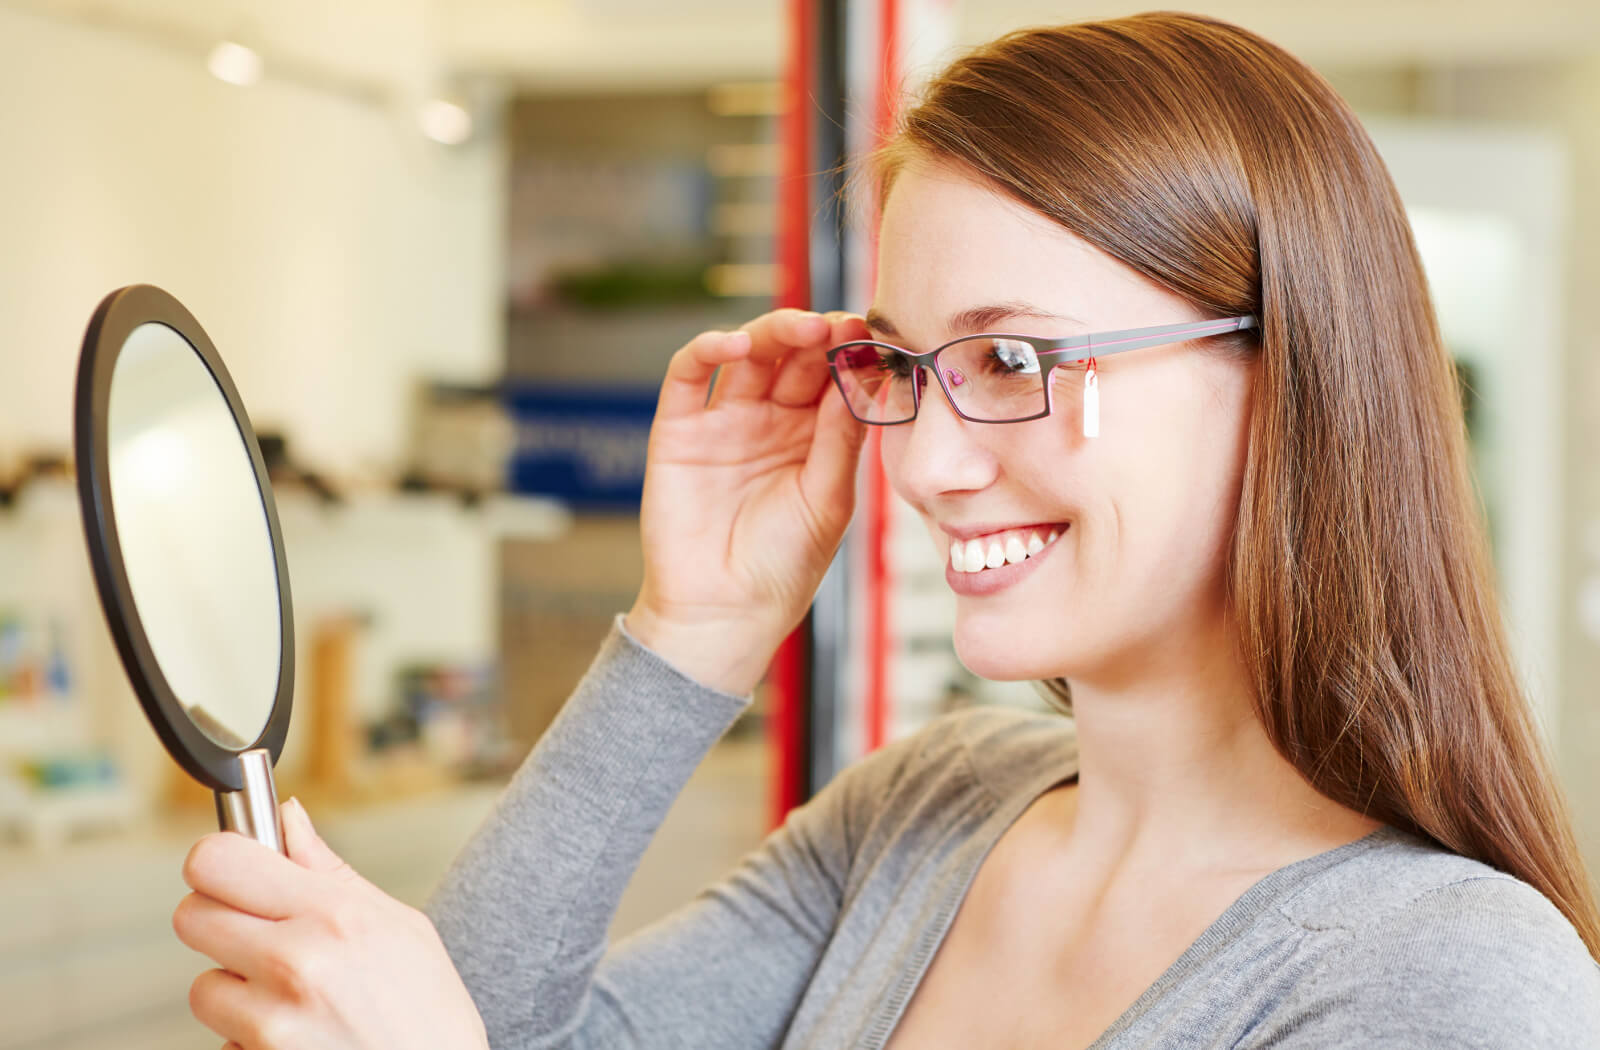 A girl trying on new glasses and examining herself in a small hand-held mirror.